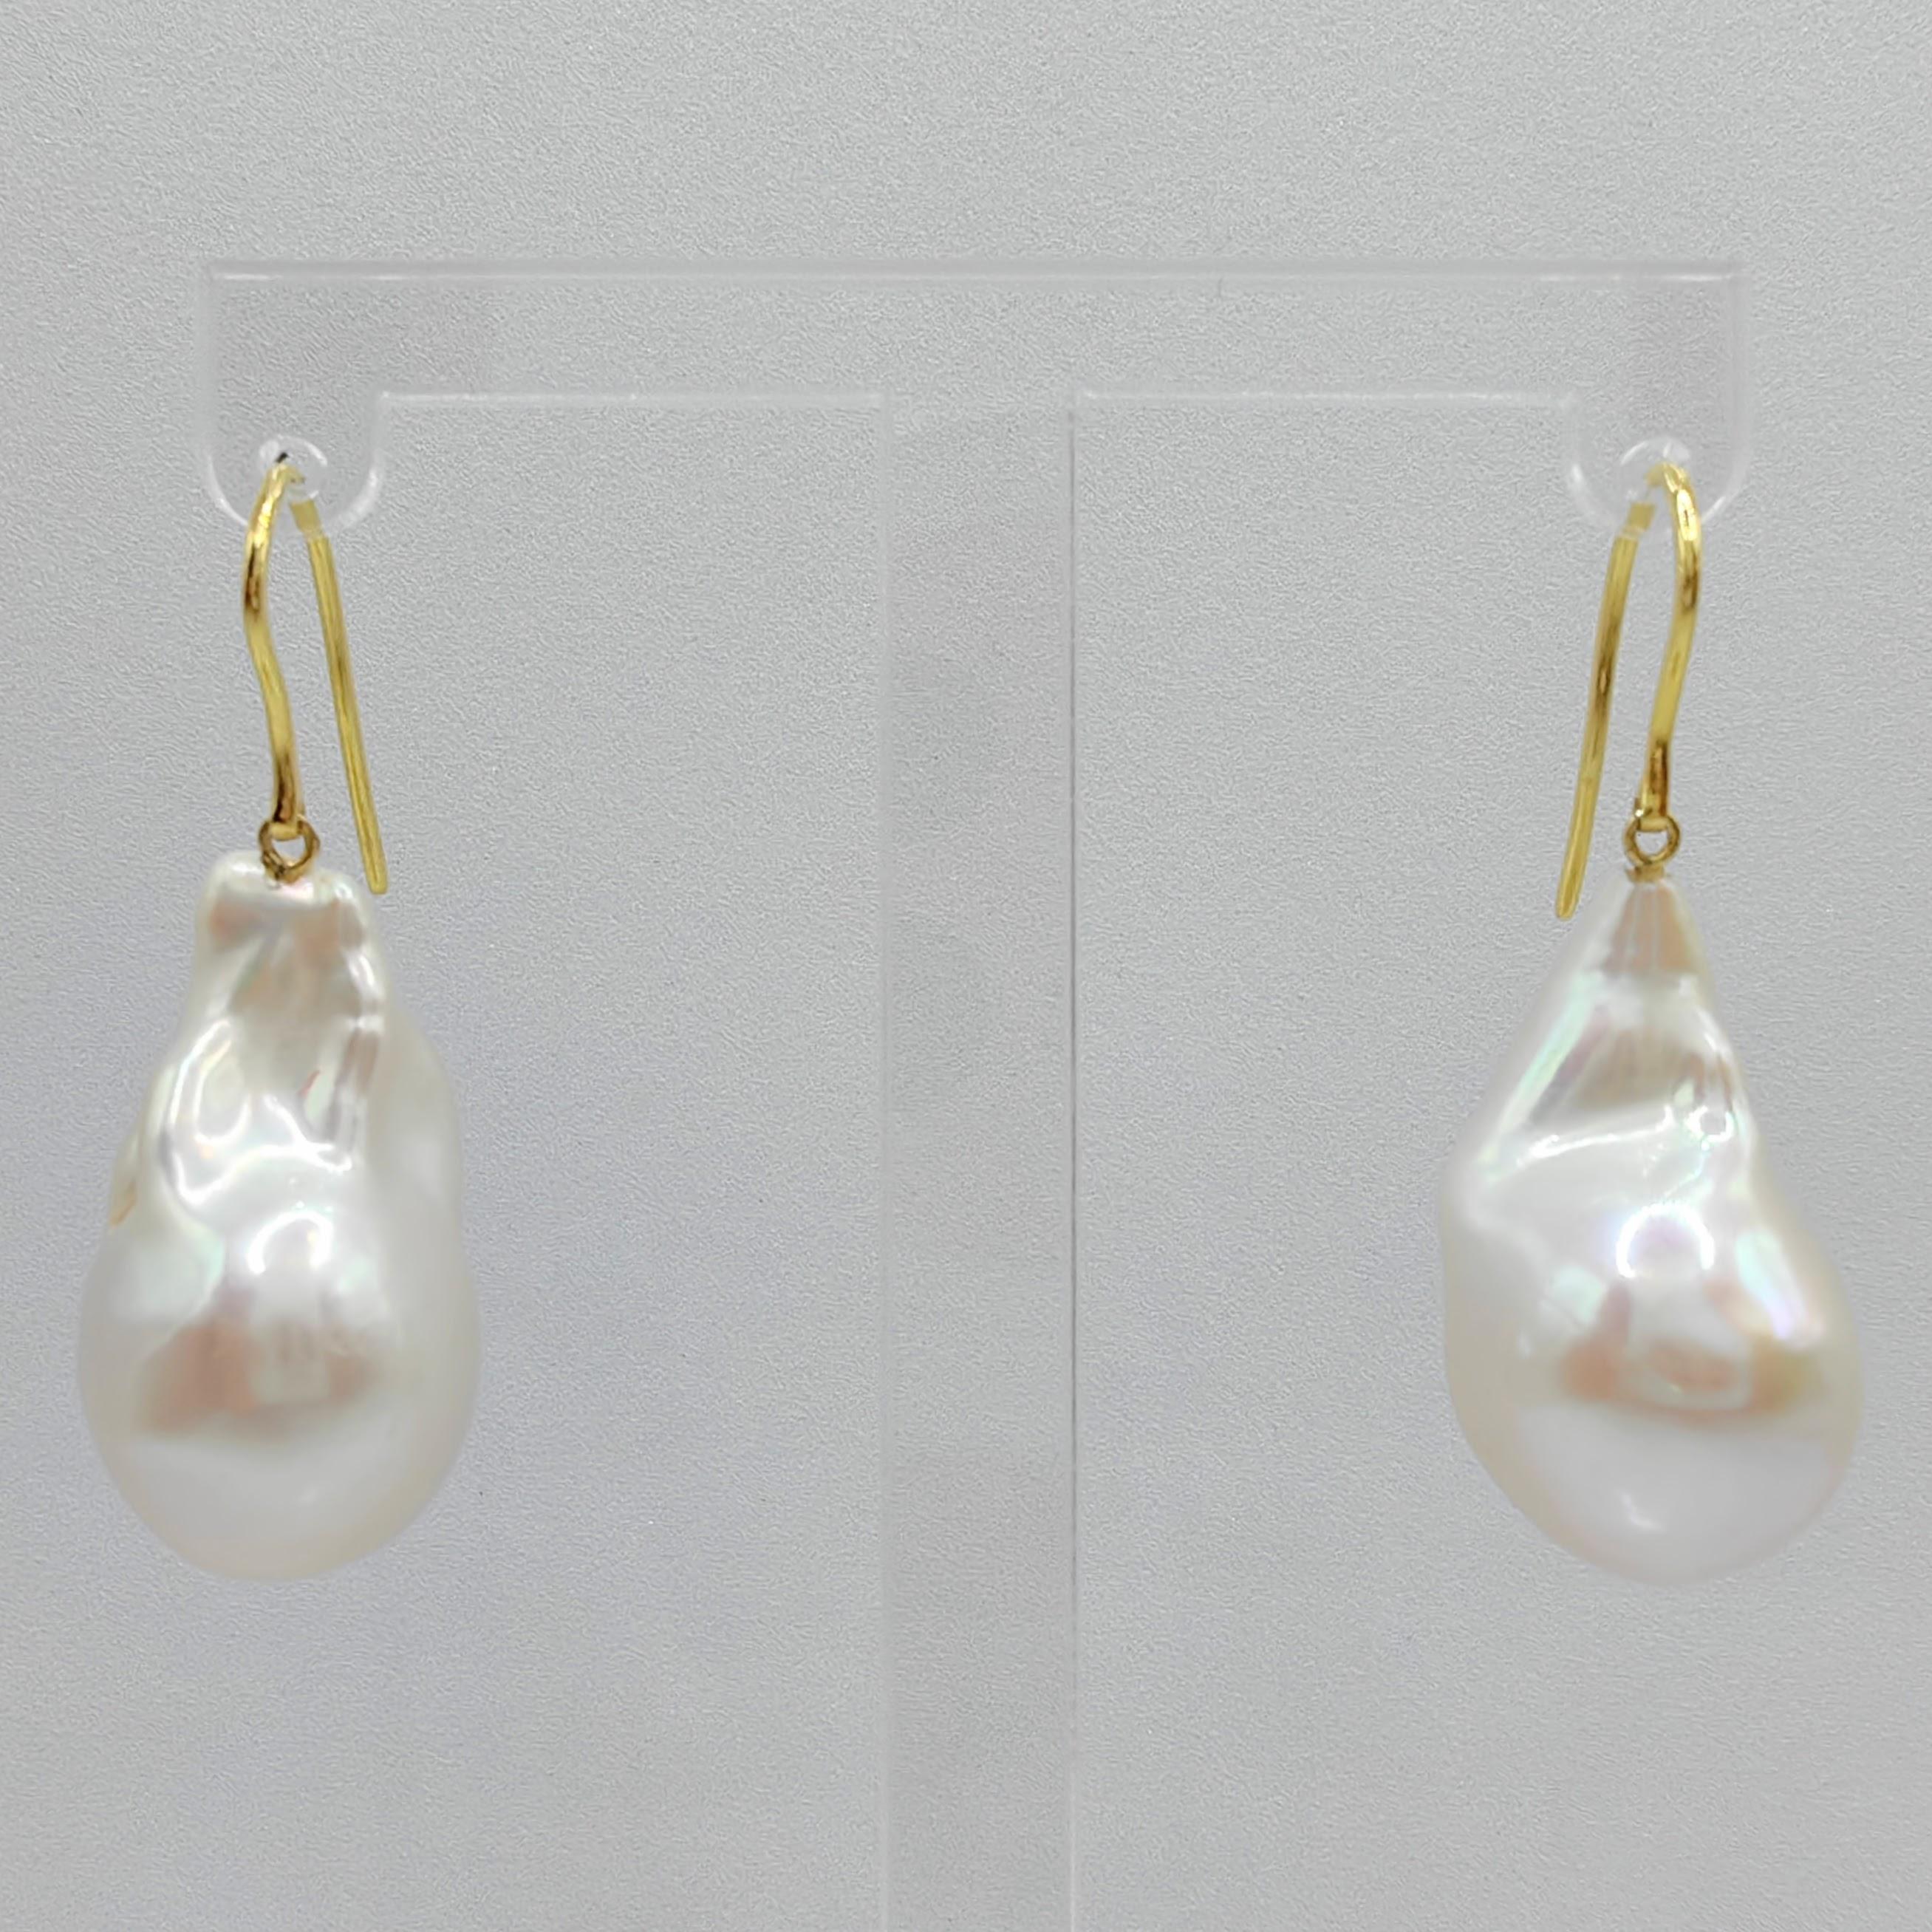 Indulge in the alluring grace of our Iridescent Baroque Pearl Drop Earrings, crafted to captivate and inspire. These remarkable earrings feature stunning Freshwater Cultured Baroque Pearls, boasting a brilliant white hue with a delicate pink